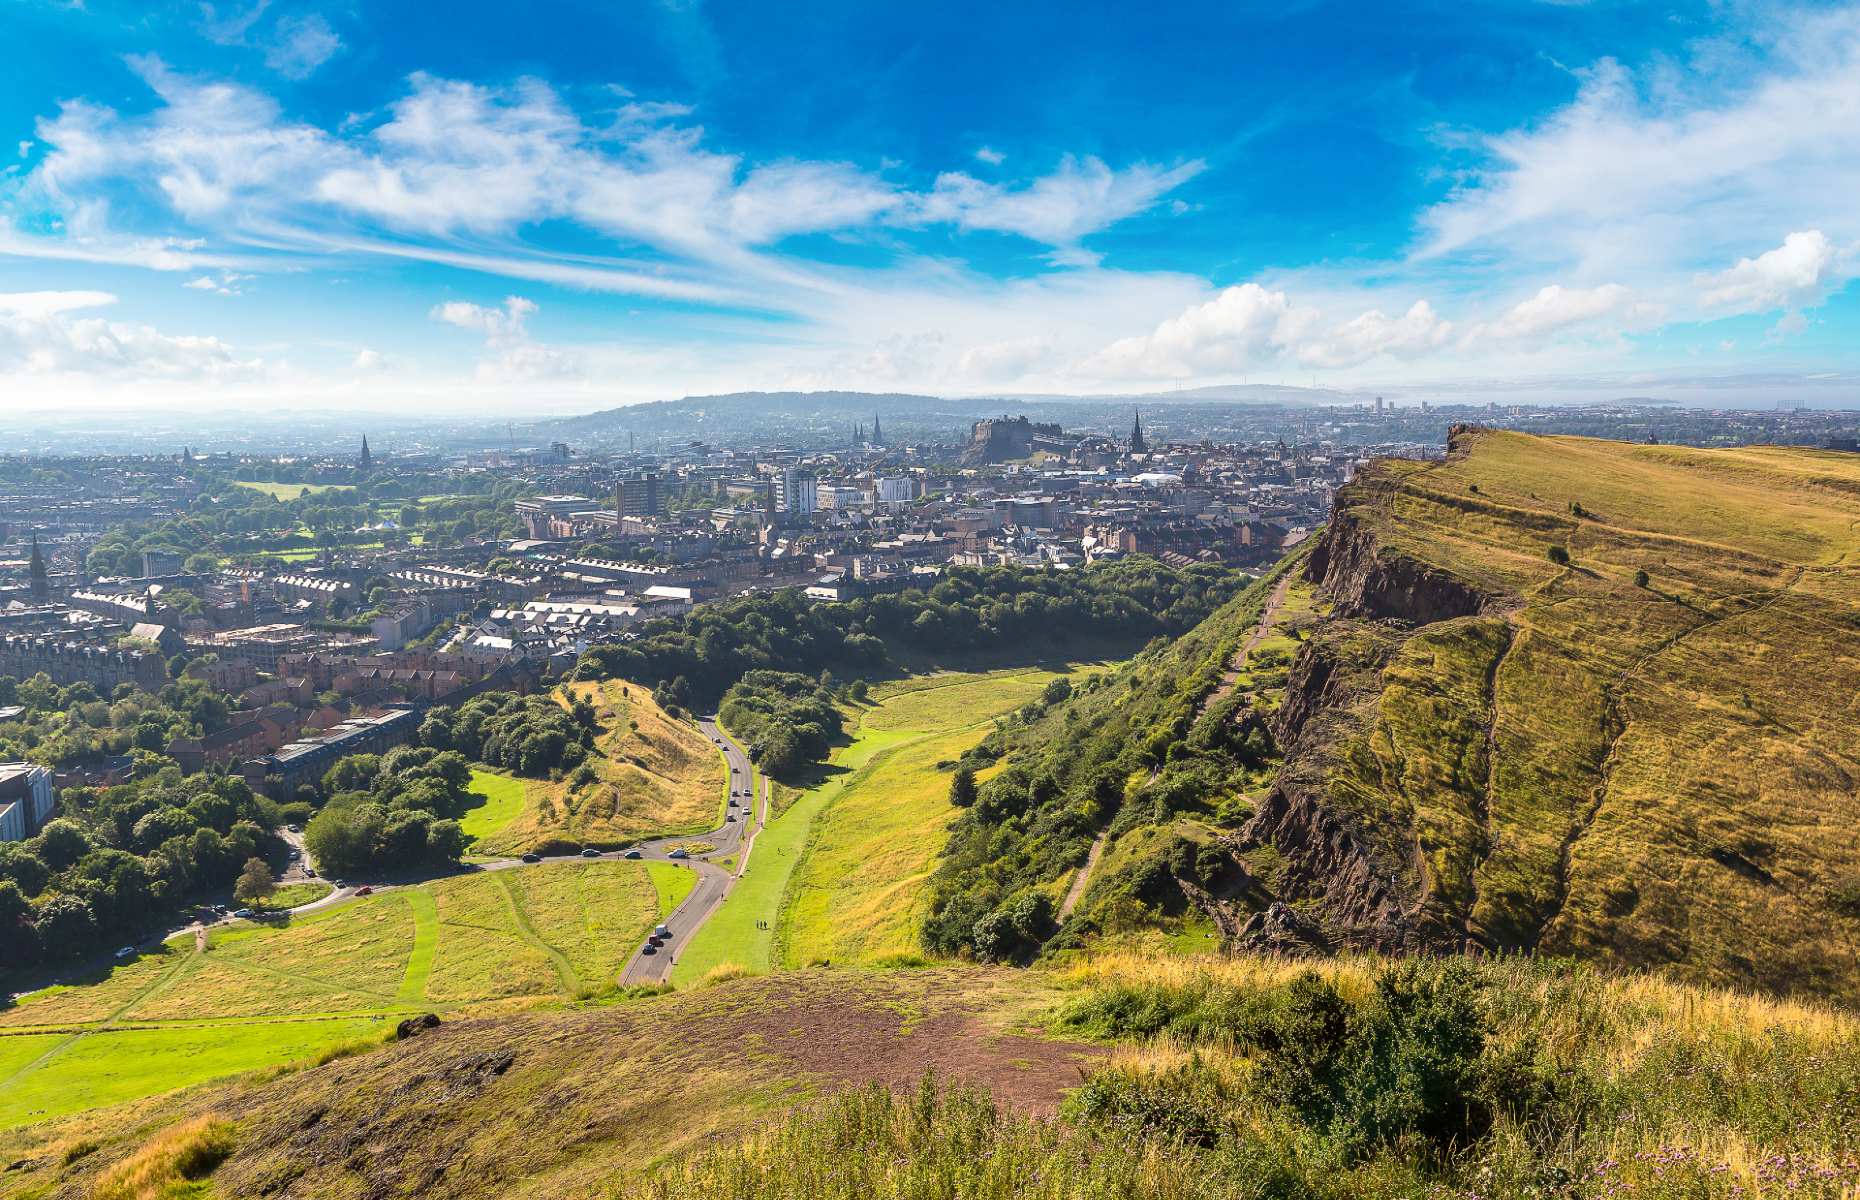 The view from the top of Arthur's Seat in Edinburgh (Image: Sergii Figurnyi/Shutterstock)